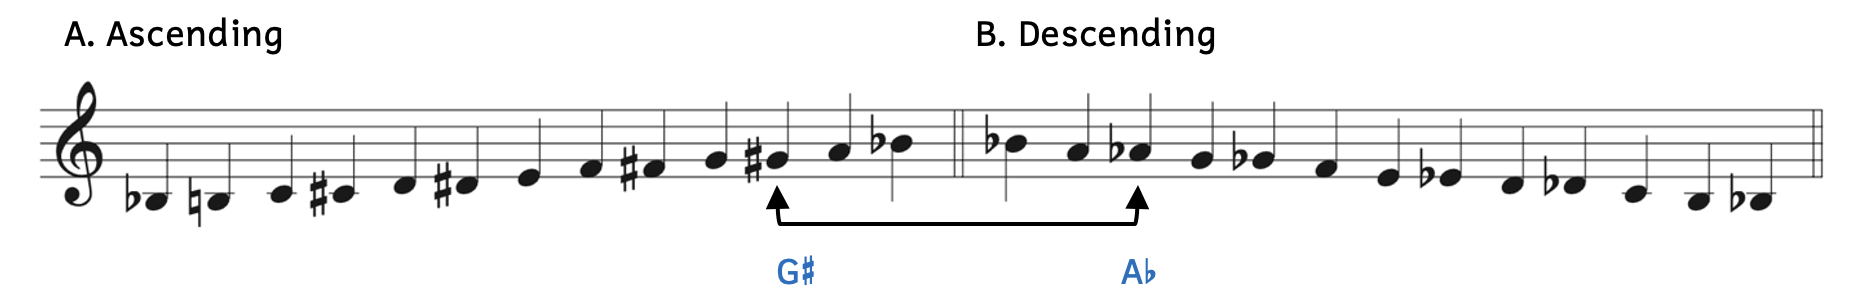 Ascending and descending chromatic scale. Example A shows an ascending chromatic scale beginning on B-flat. The pitches are B-flat, B-natural, C, C-sharp, D, D-sharp, E, F, F-sharp, G, G-sharp, A, and B-flat. Example B shows the descending chromatic scale beginning on B-flat. The pitches are B-flat, A, A-flat, G, G-flat, F, E, E-flat, D, D-flat, C, B, and B-flat. Enharmonically equivalent pitches, such as G-sharp and A-flat, are written depending on if the scale ascends or descends.